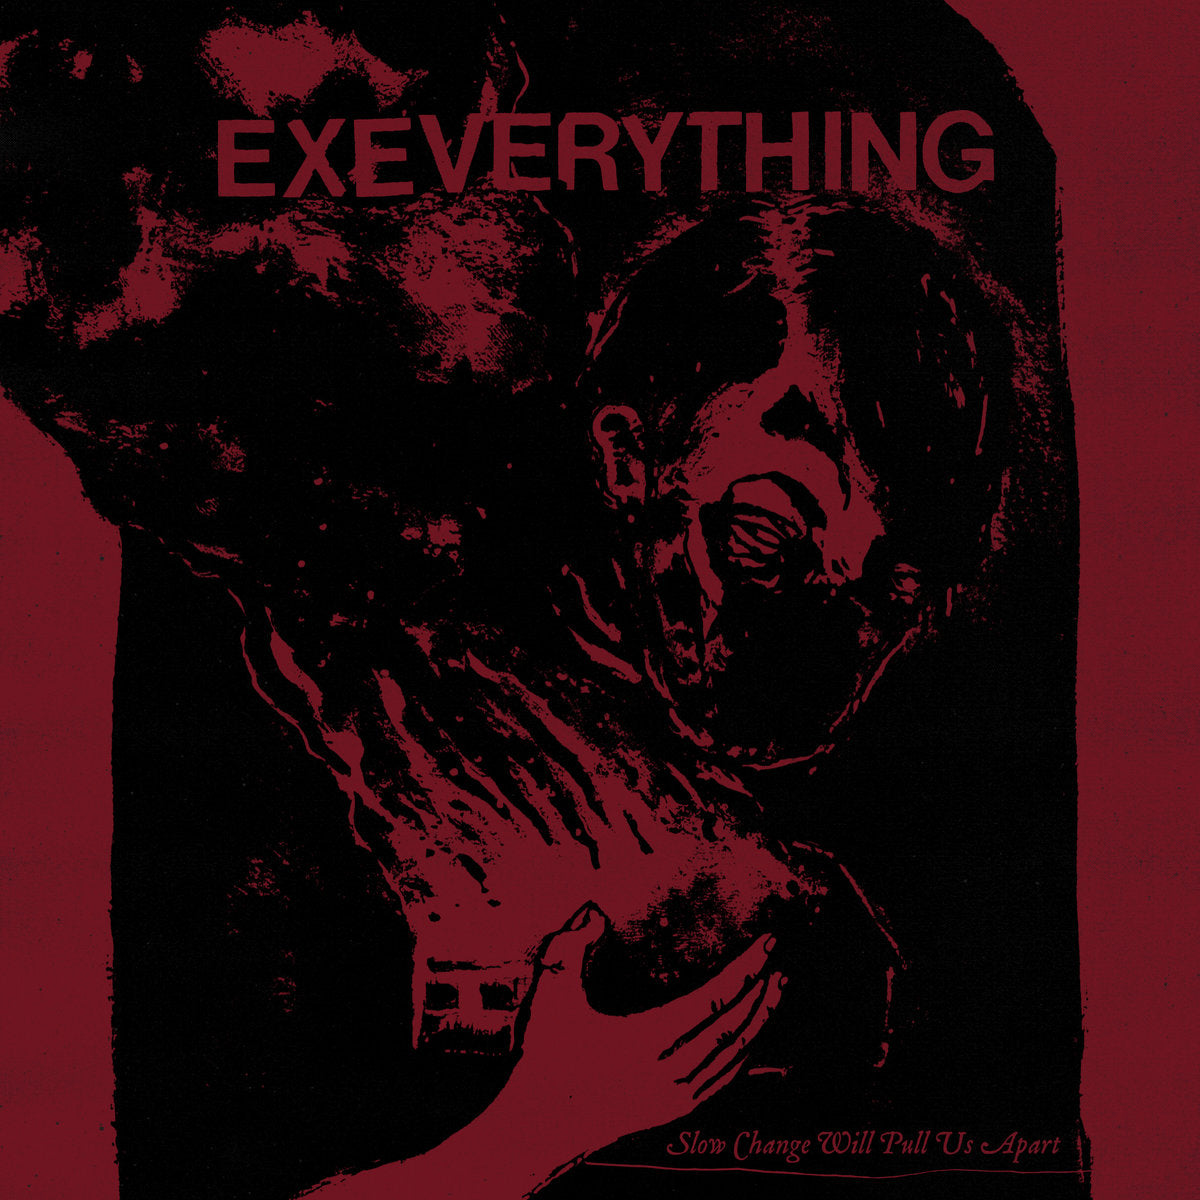 EX EVERYTHING "Slow Change Will Pull Us Apart" CD